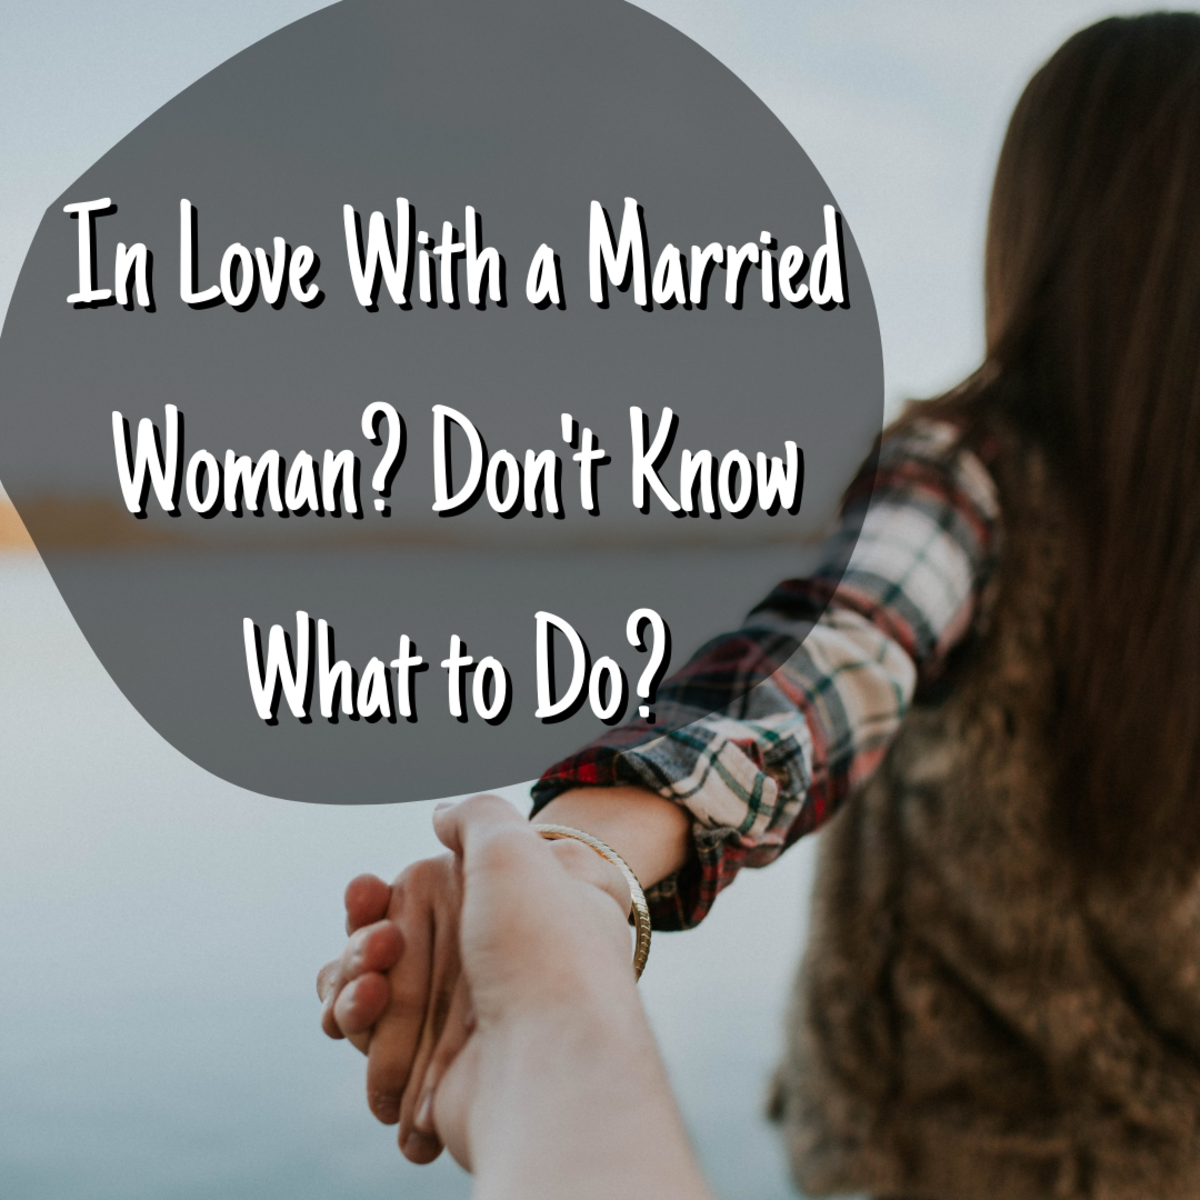 When Love Gets Complicated: What to Do When You Love a Married Woman